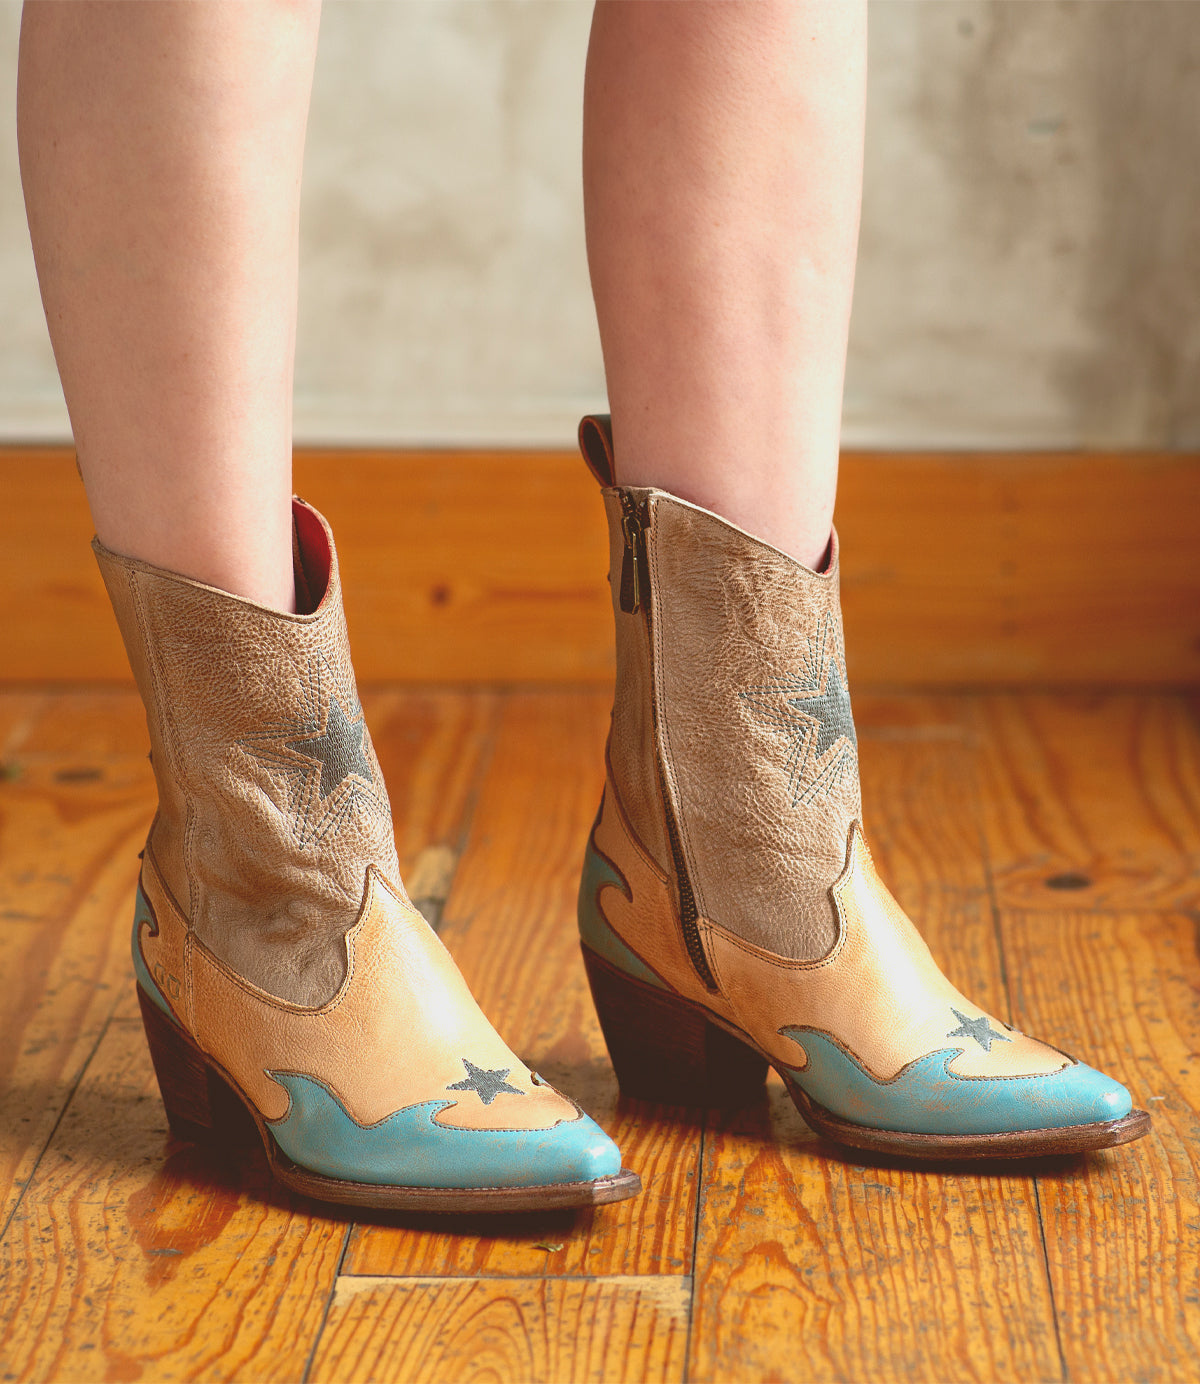 An artistically crafted pair of Hyperspeed boots, in shades of blue and tan, by Bed Stu, worn by a woman.